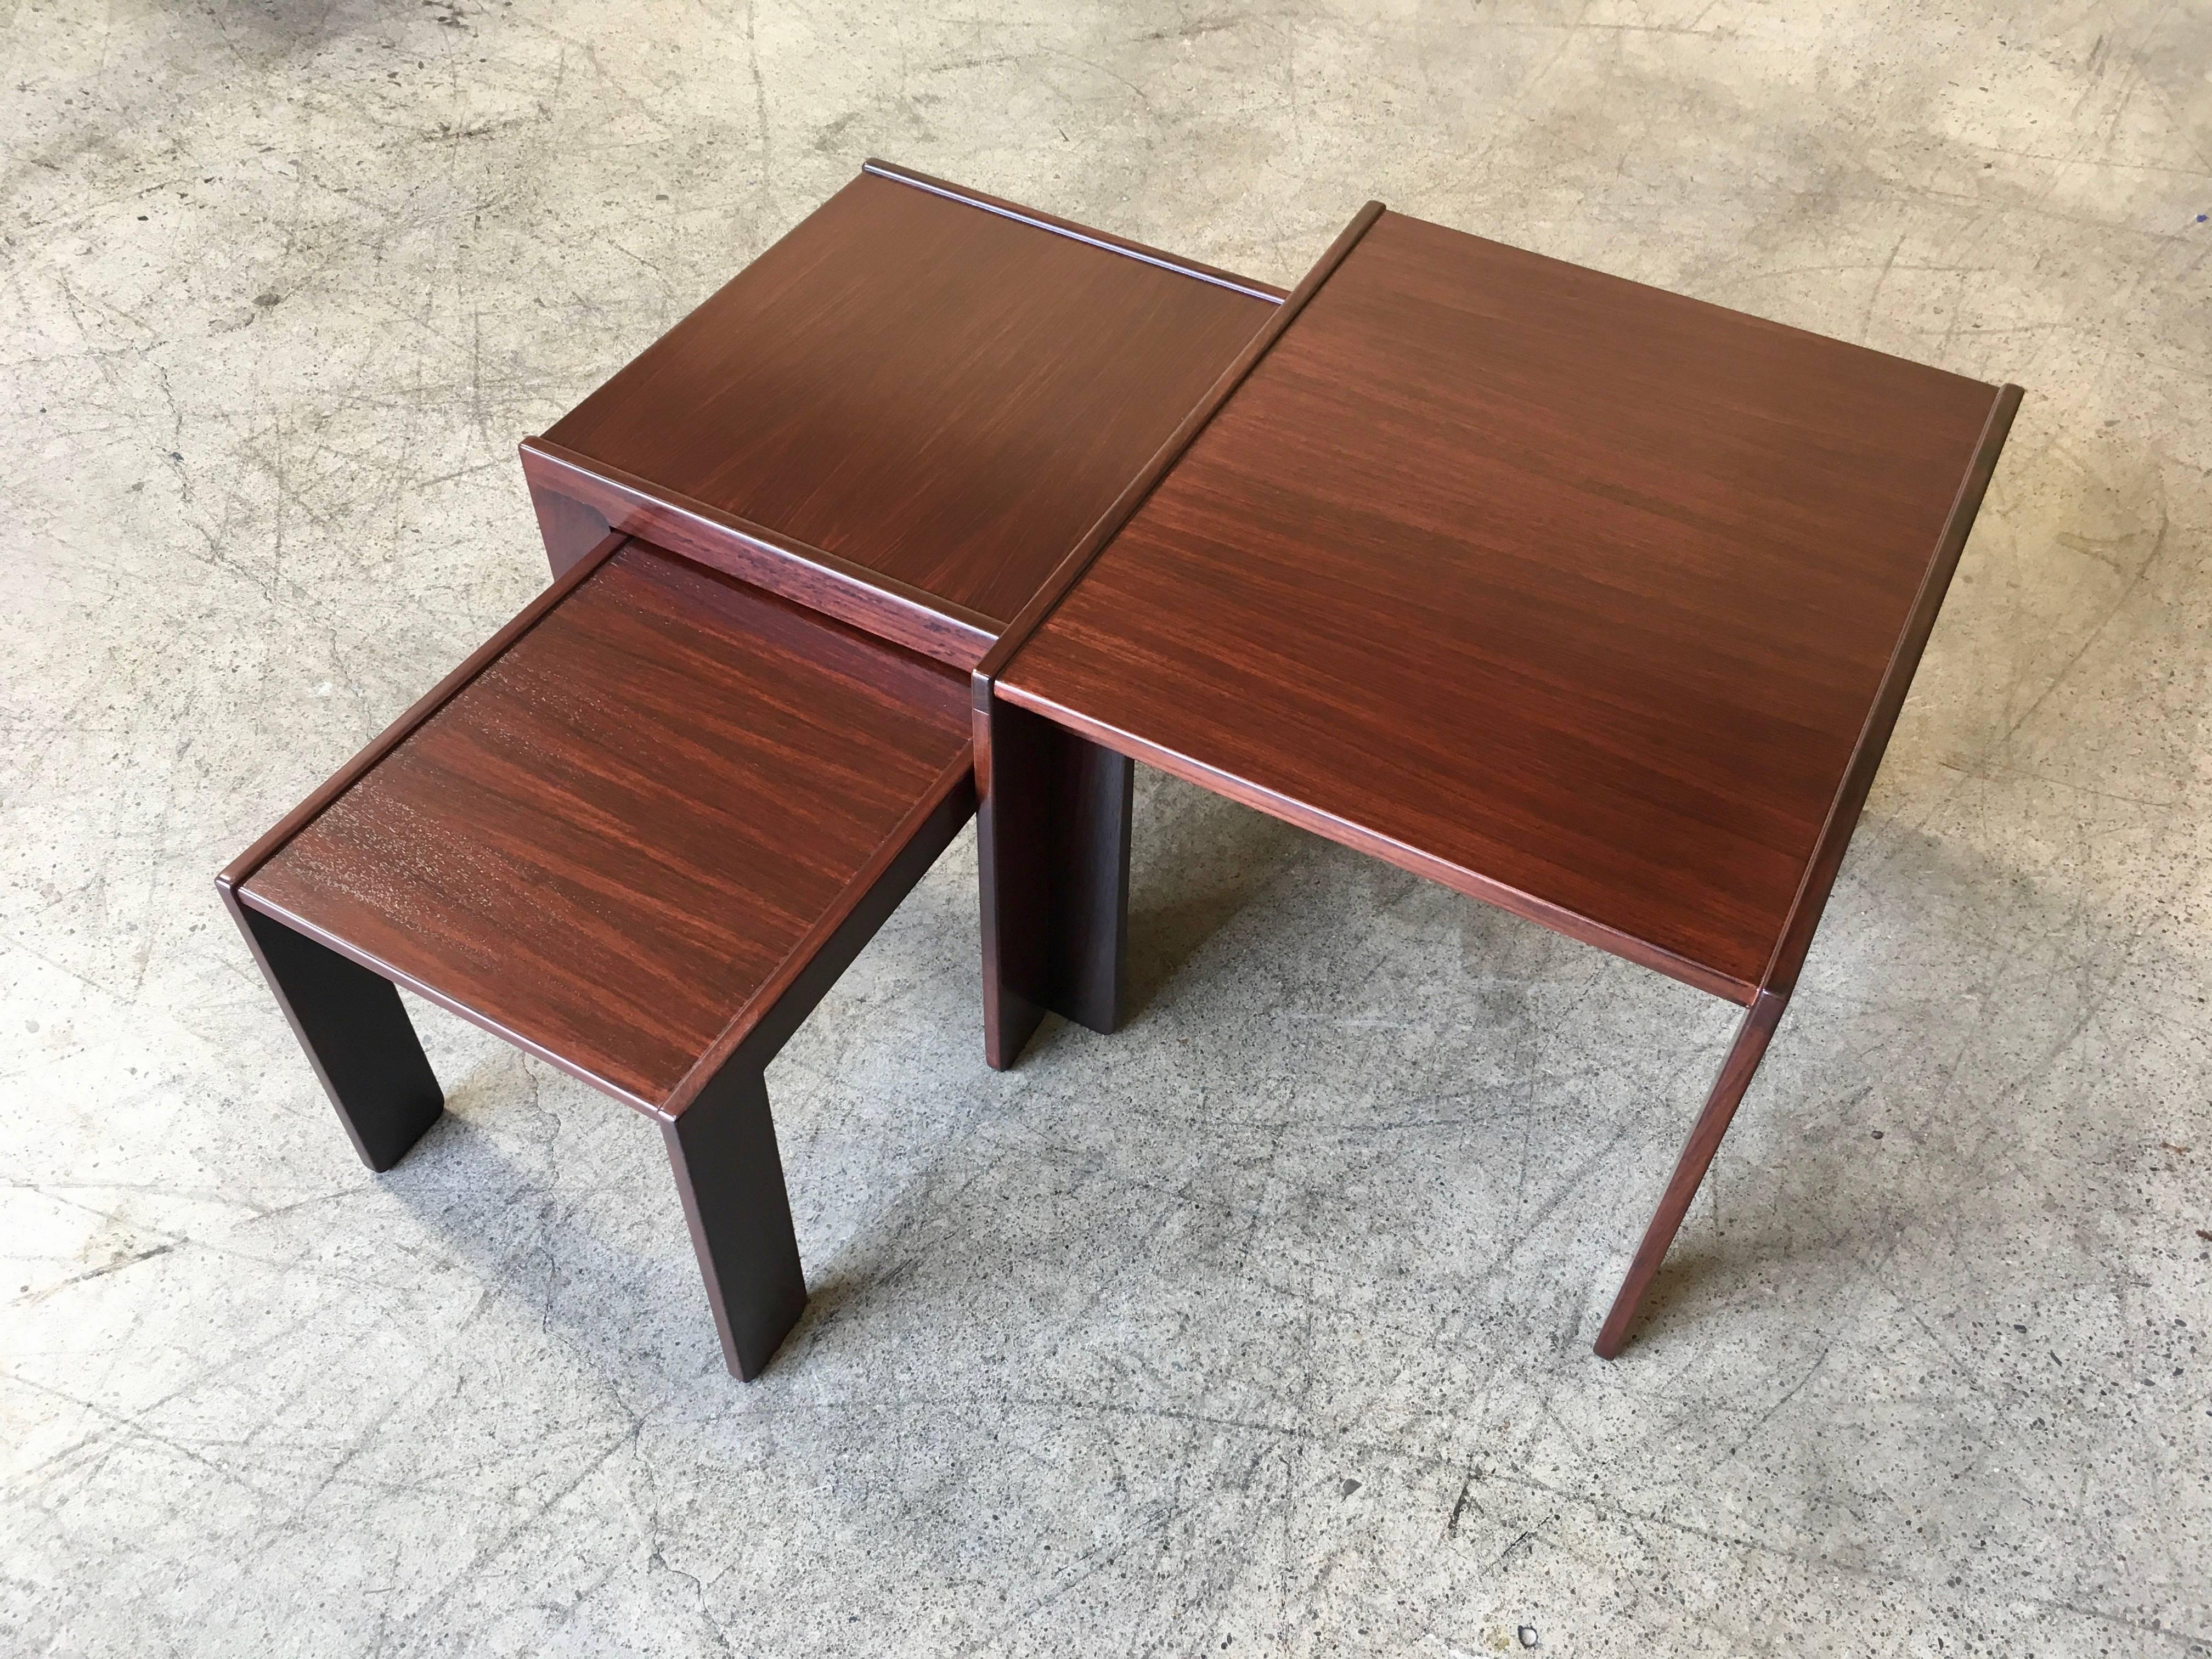 This set, consisting of three nesting tables, was designed in the 1960s by Afra and Tobia Scarpa 
Large table 19.88 D, 24 L, 17.38 H
Medium table 18.25 D, 19.5 L, 15.5 H
Small table: 17.75 L, 13.75 D, 13.5 H.